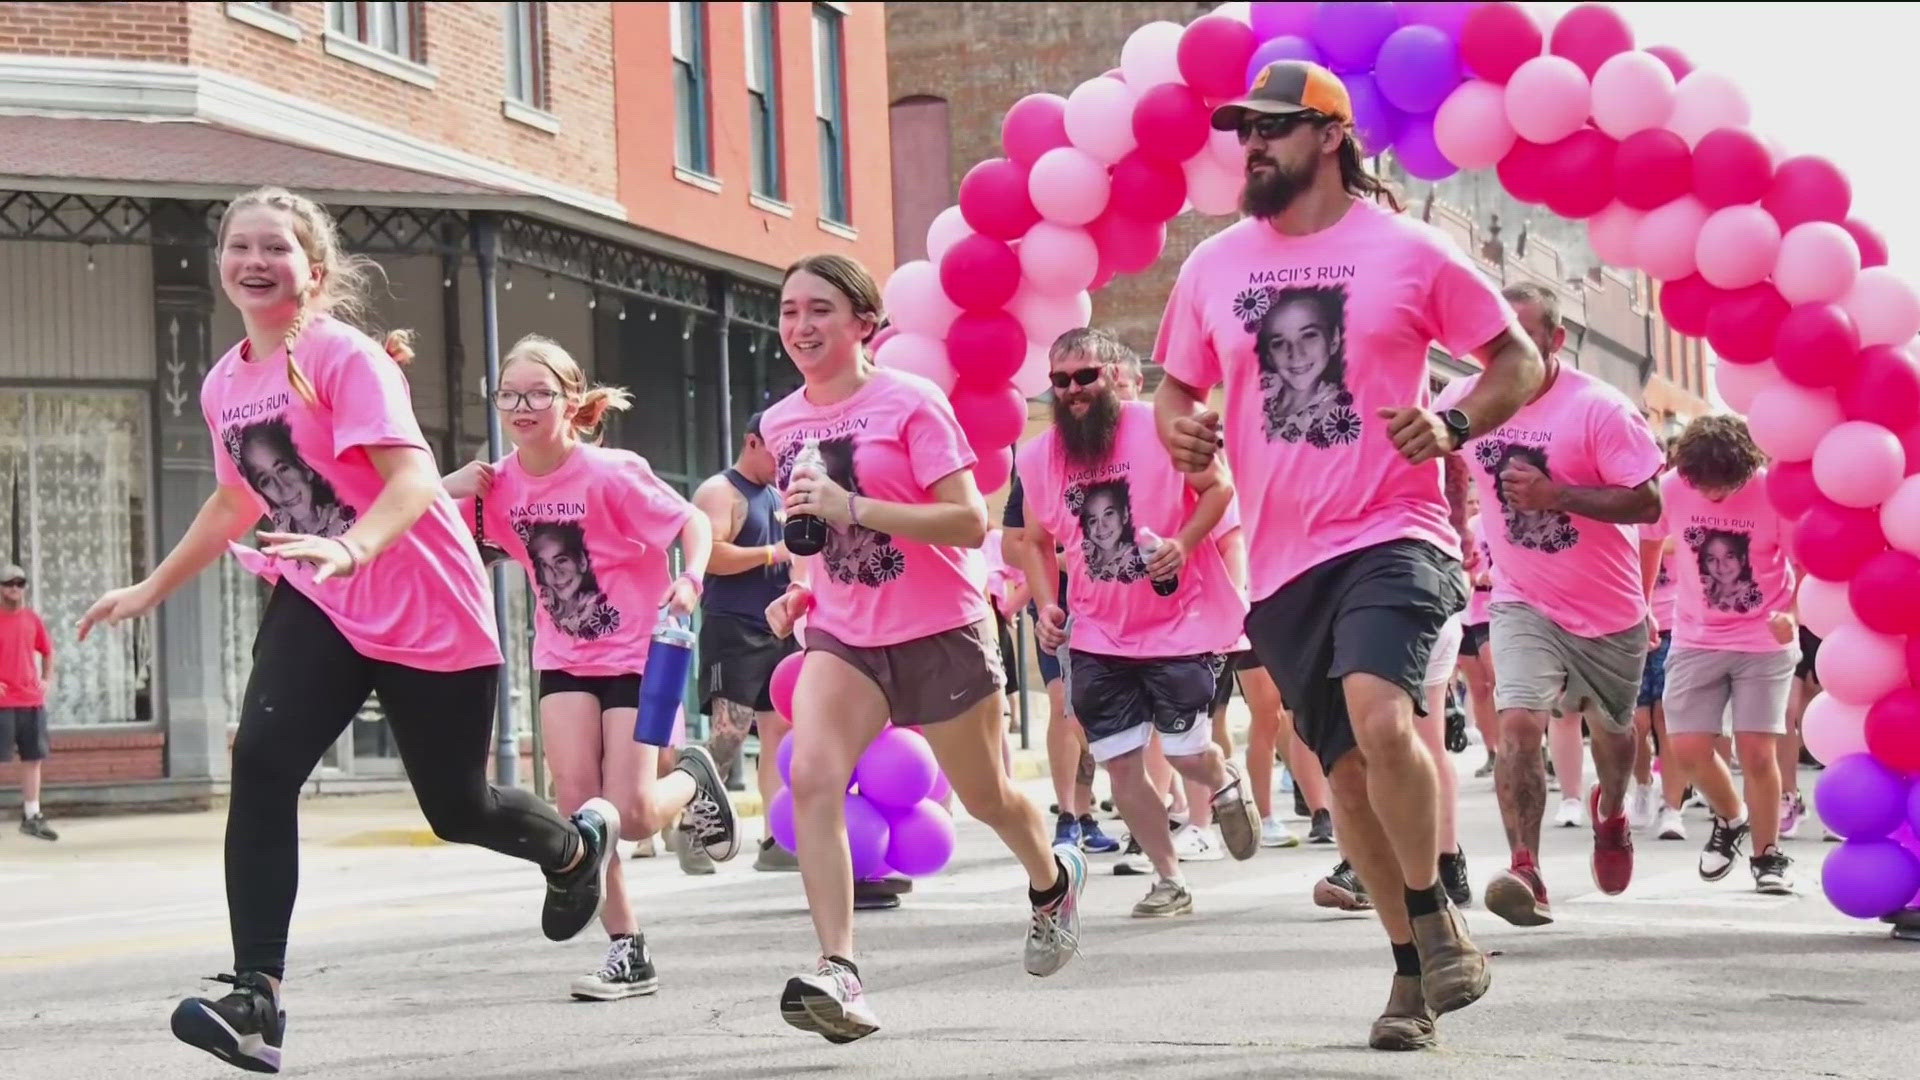 "Her twin sister Maddisen wanted to honor her sister by running a 5K, and putting on the 5K, and running for her sister," Macii's grandmother Shawna Knighten said.